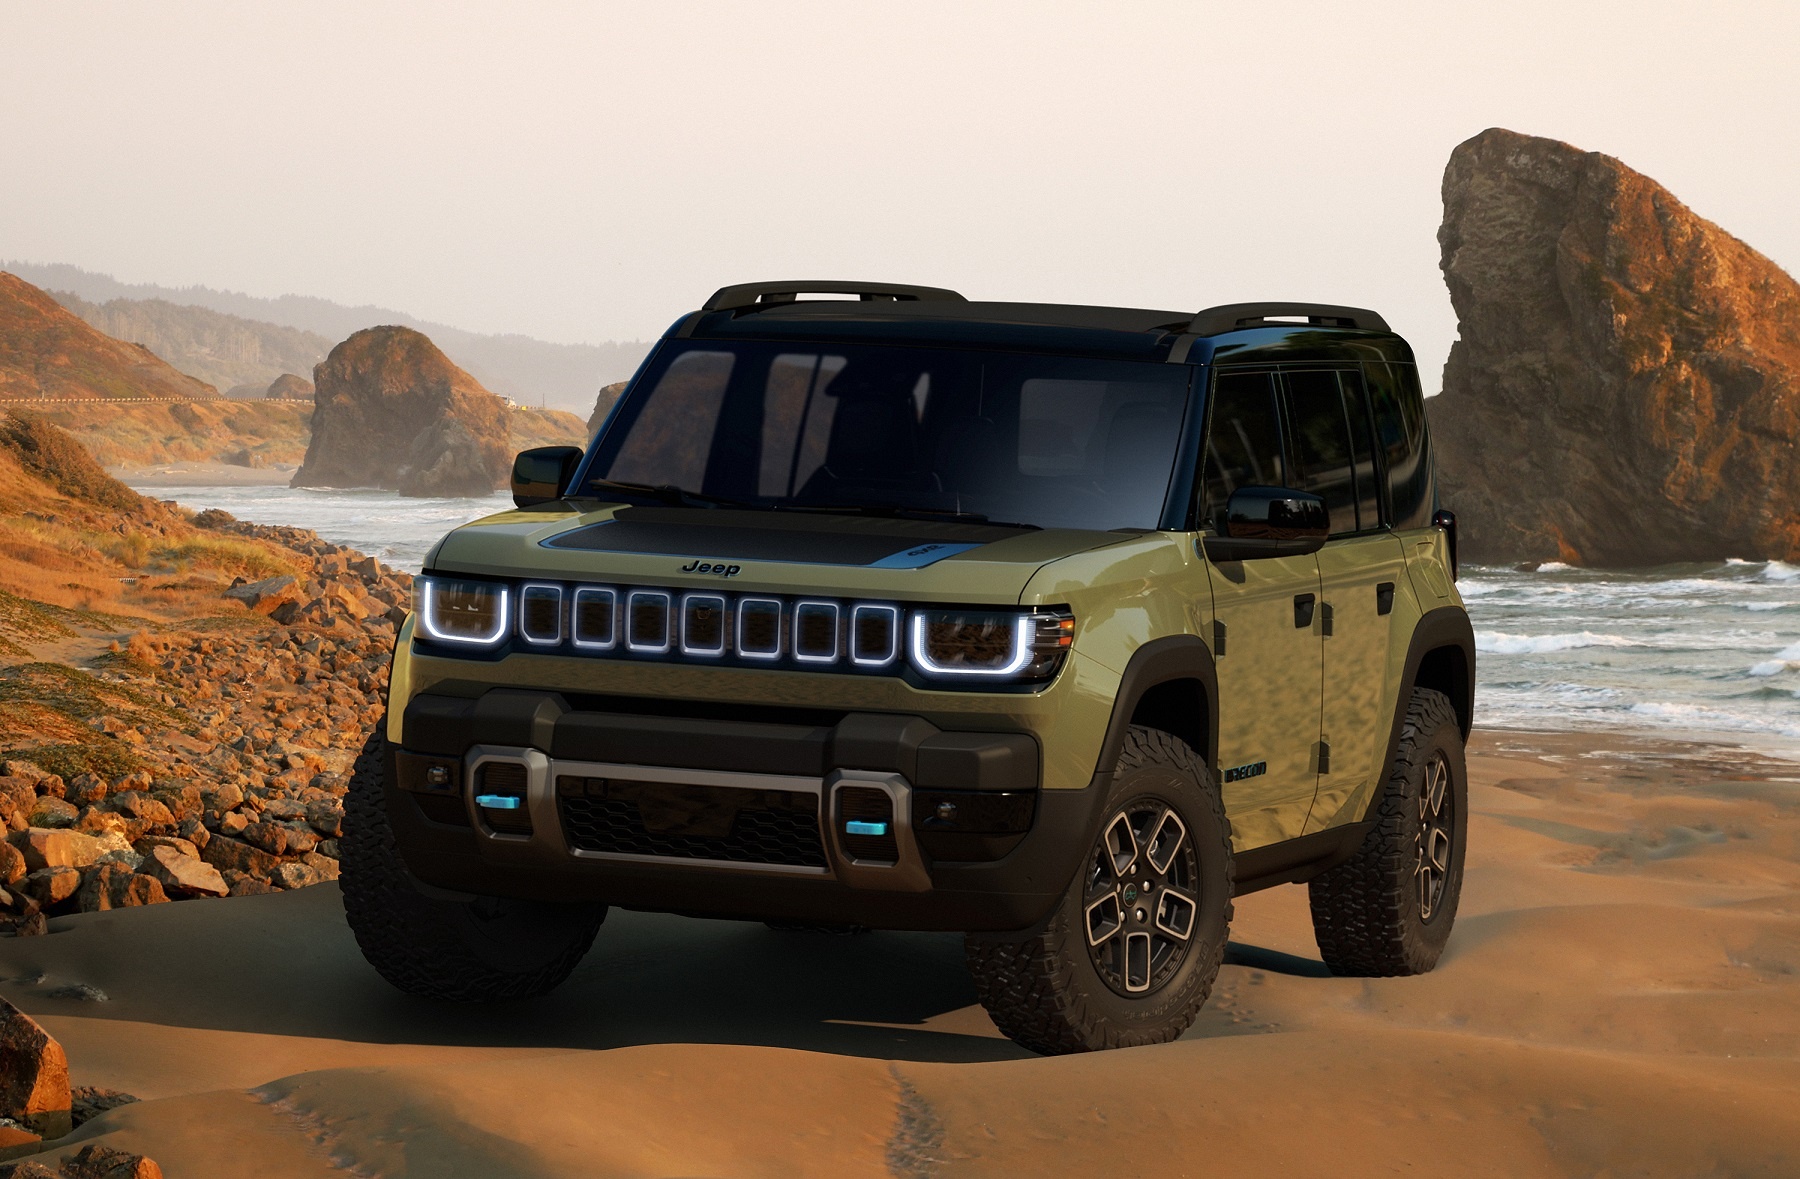 Jeep Brand Reveals Plan to Lead Global SUV Electrification